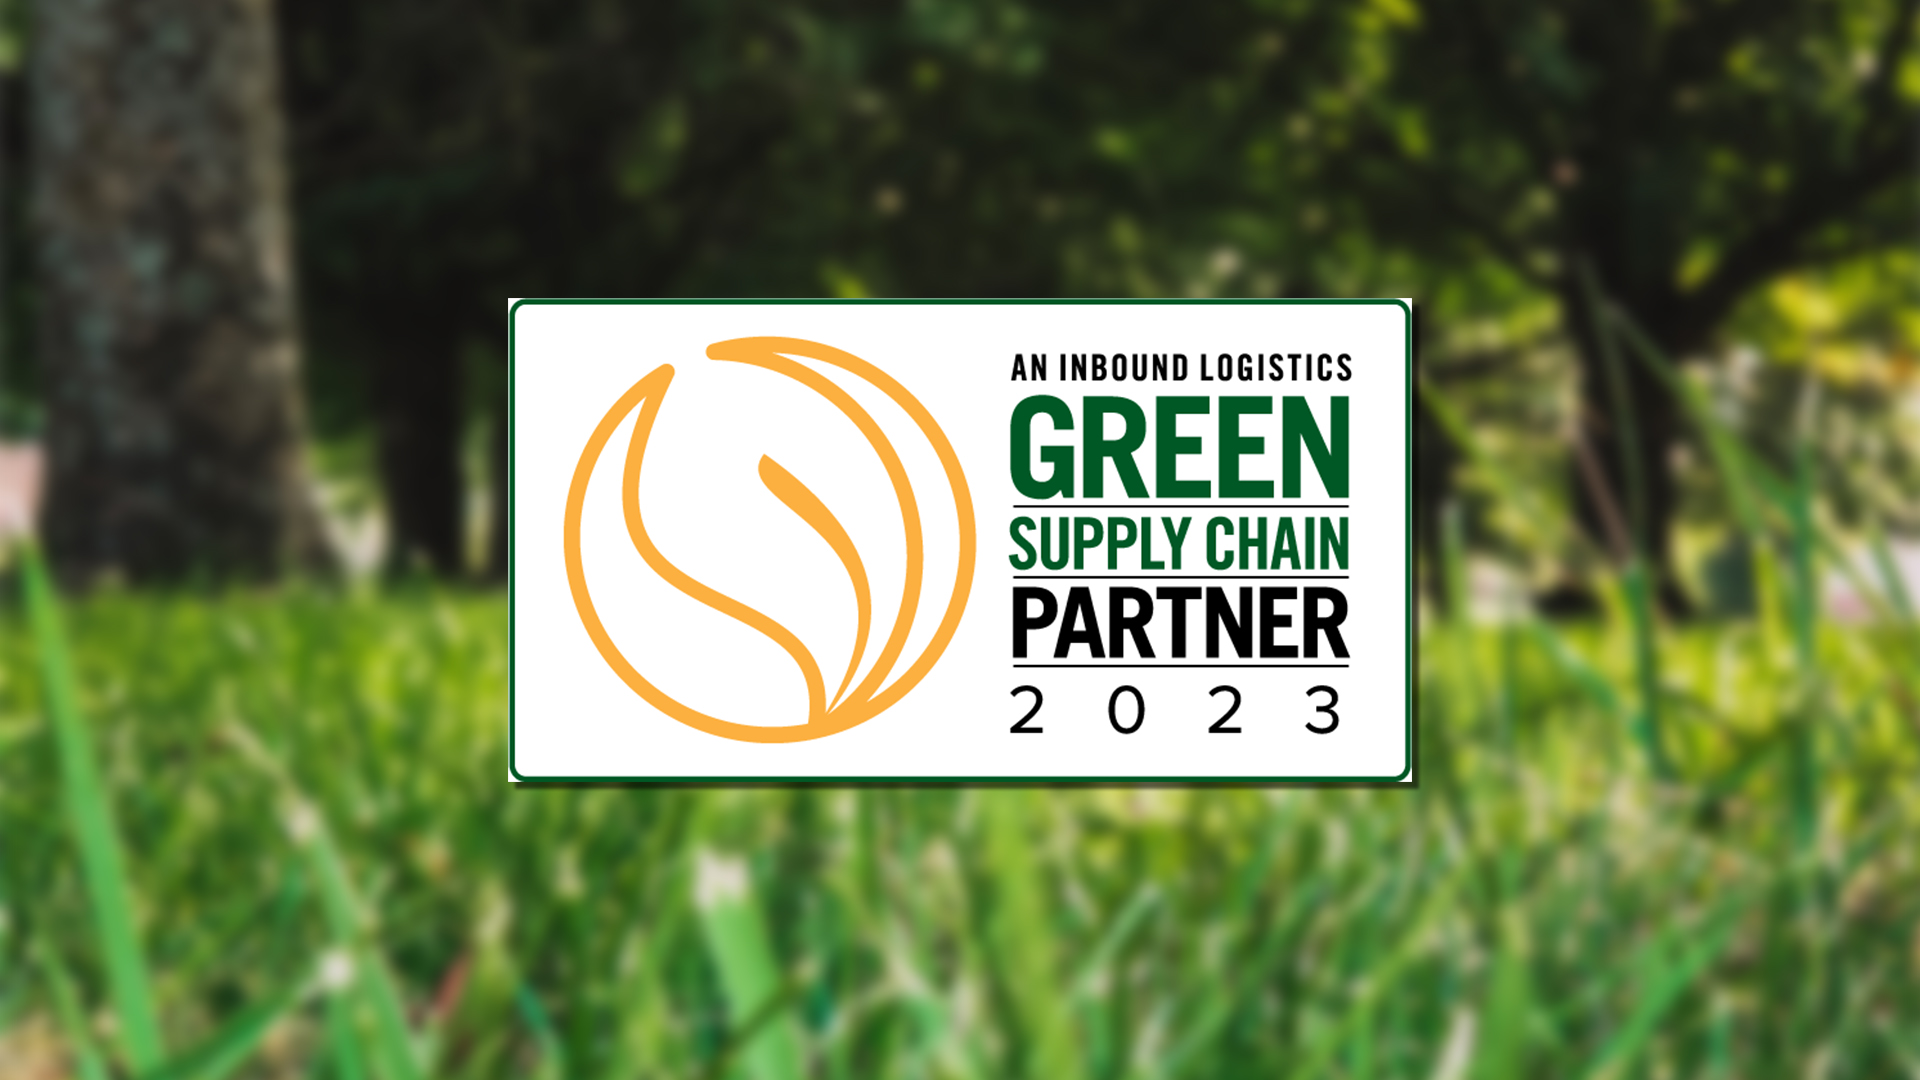 Featured image for “Rinchem Named a 2023 Top Green Supply Chain Partner by Inbound Logistics”